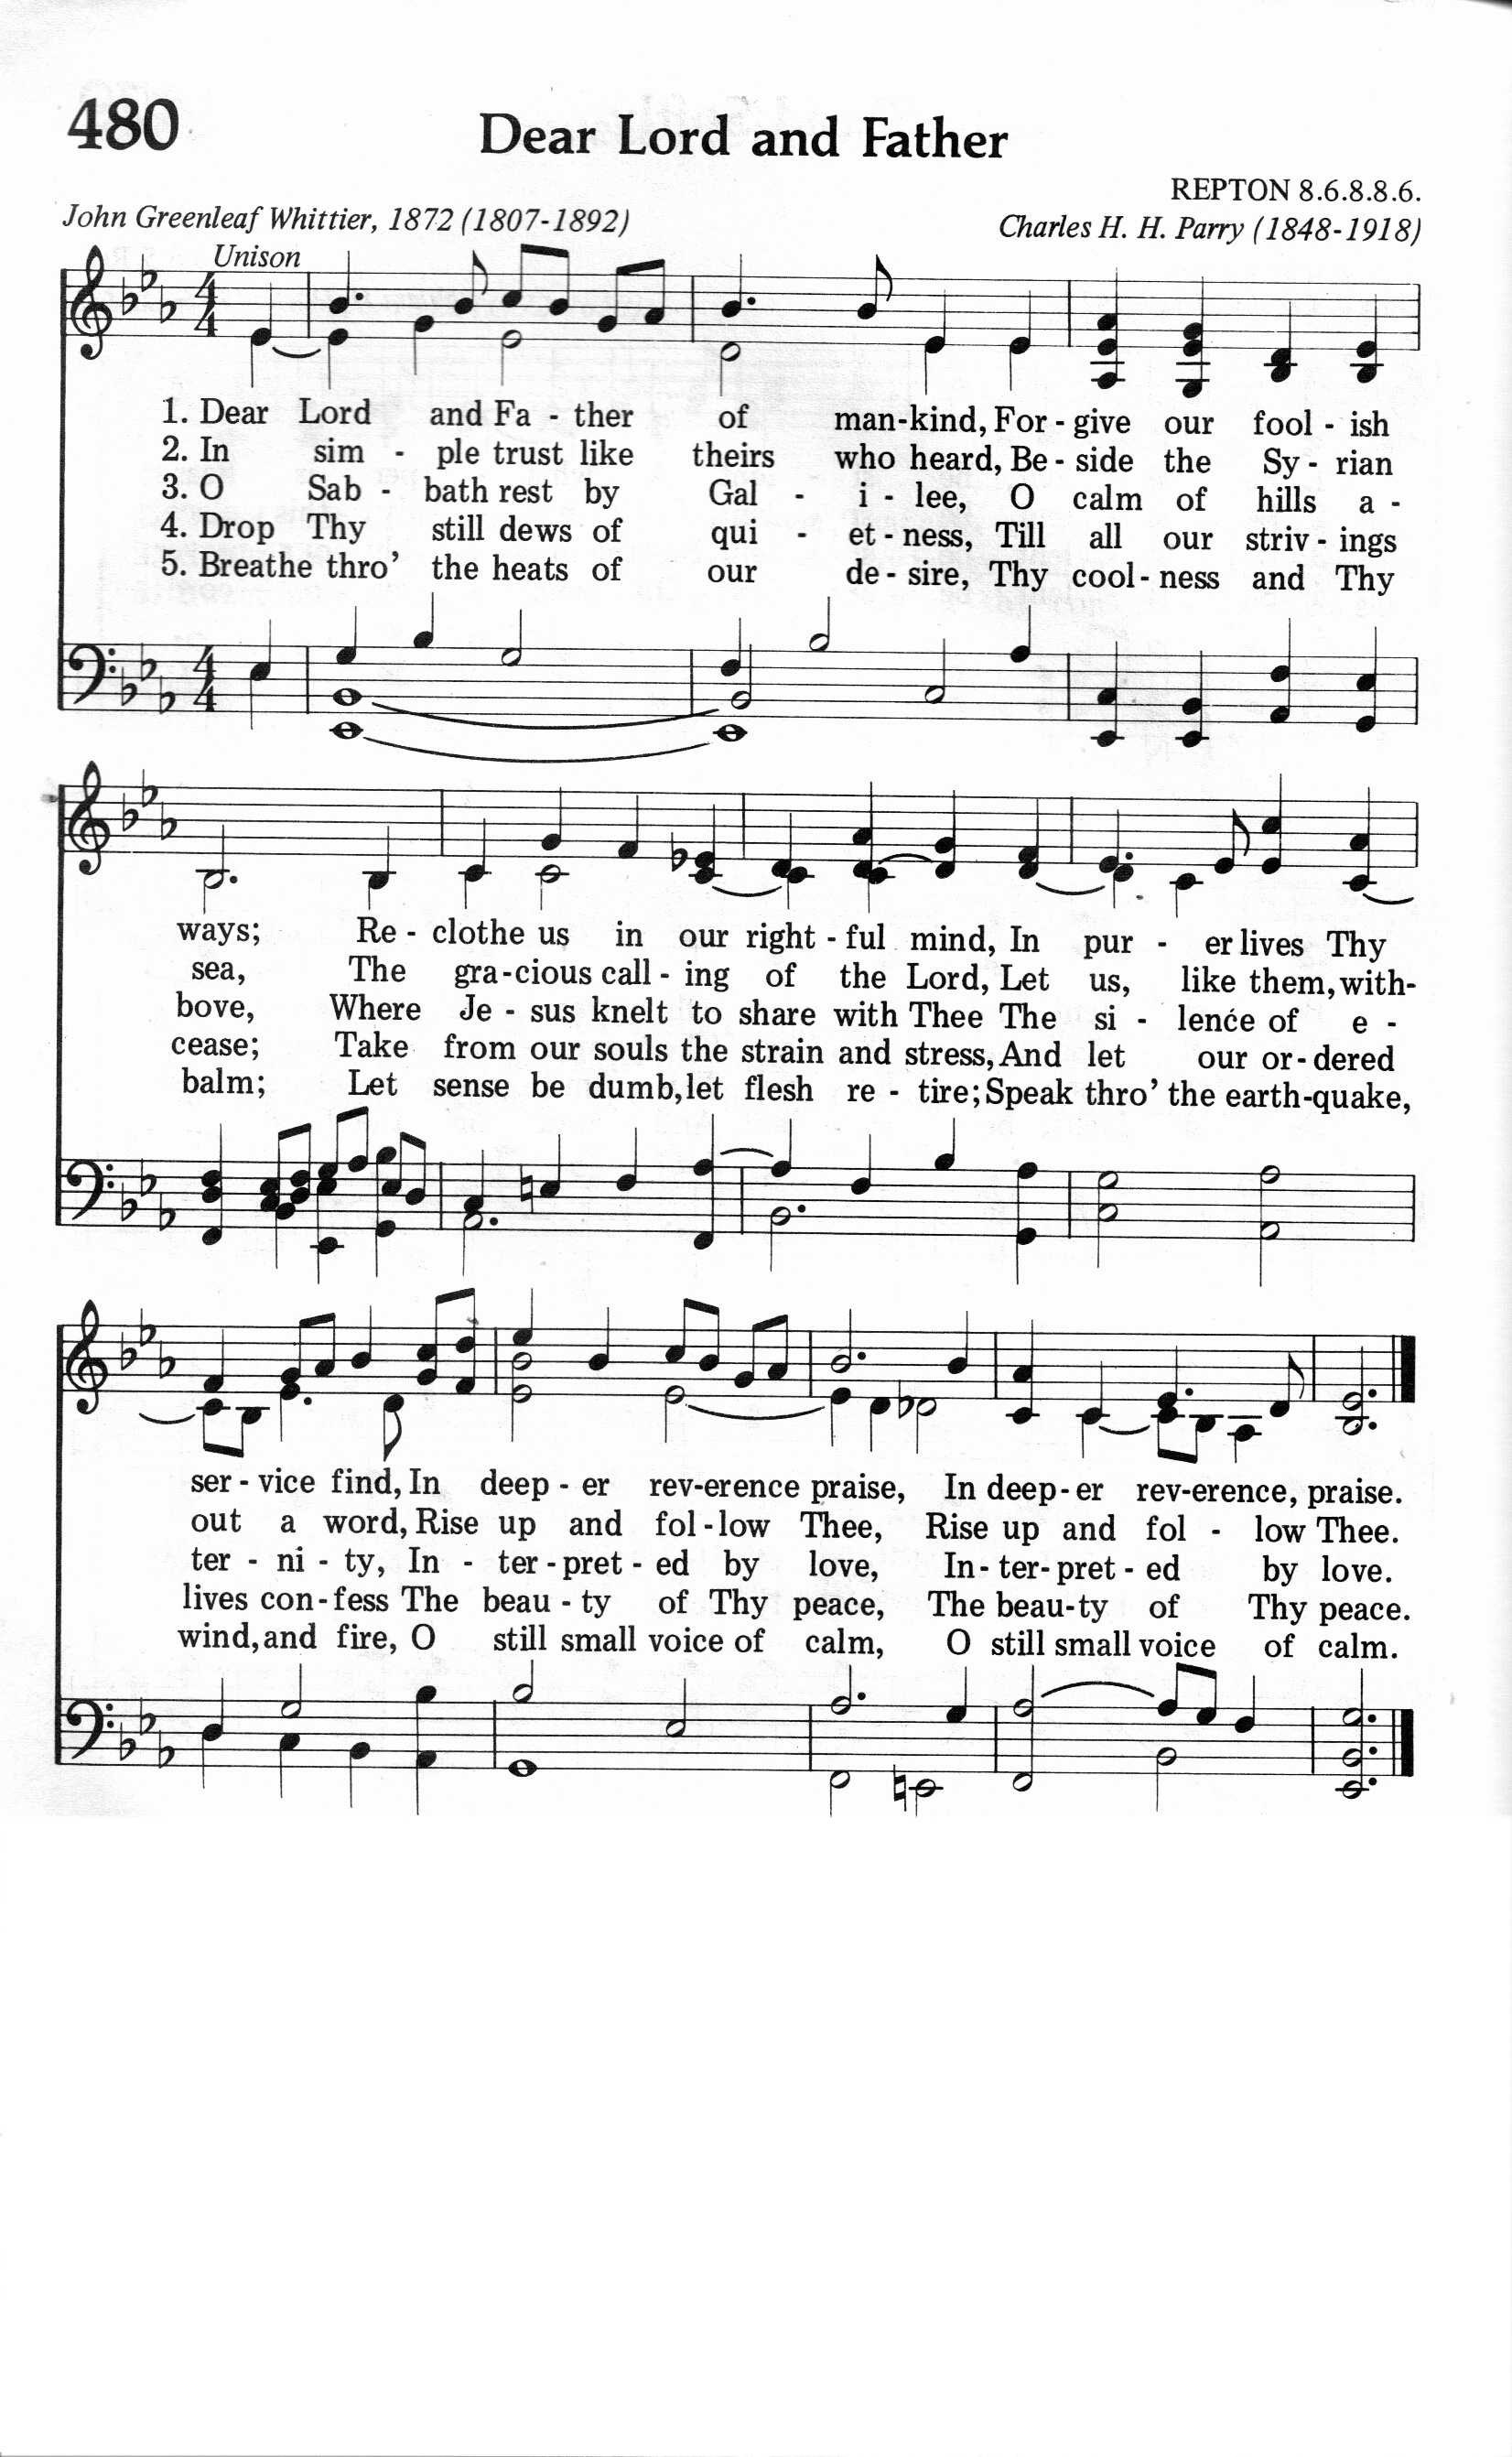 481.Dear Lord and Father-695HYMN